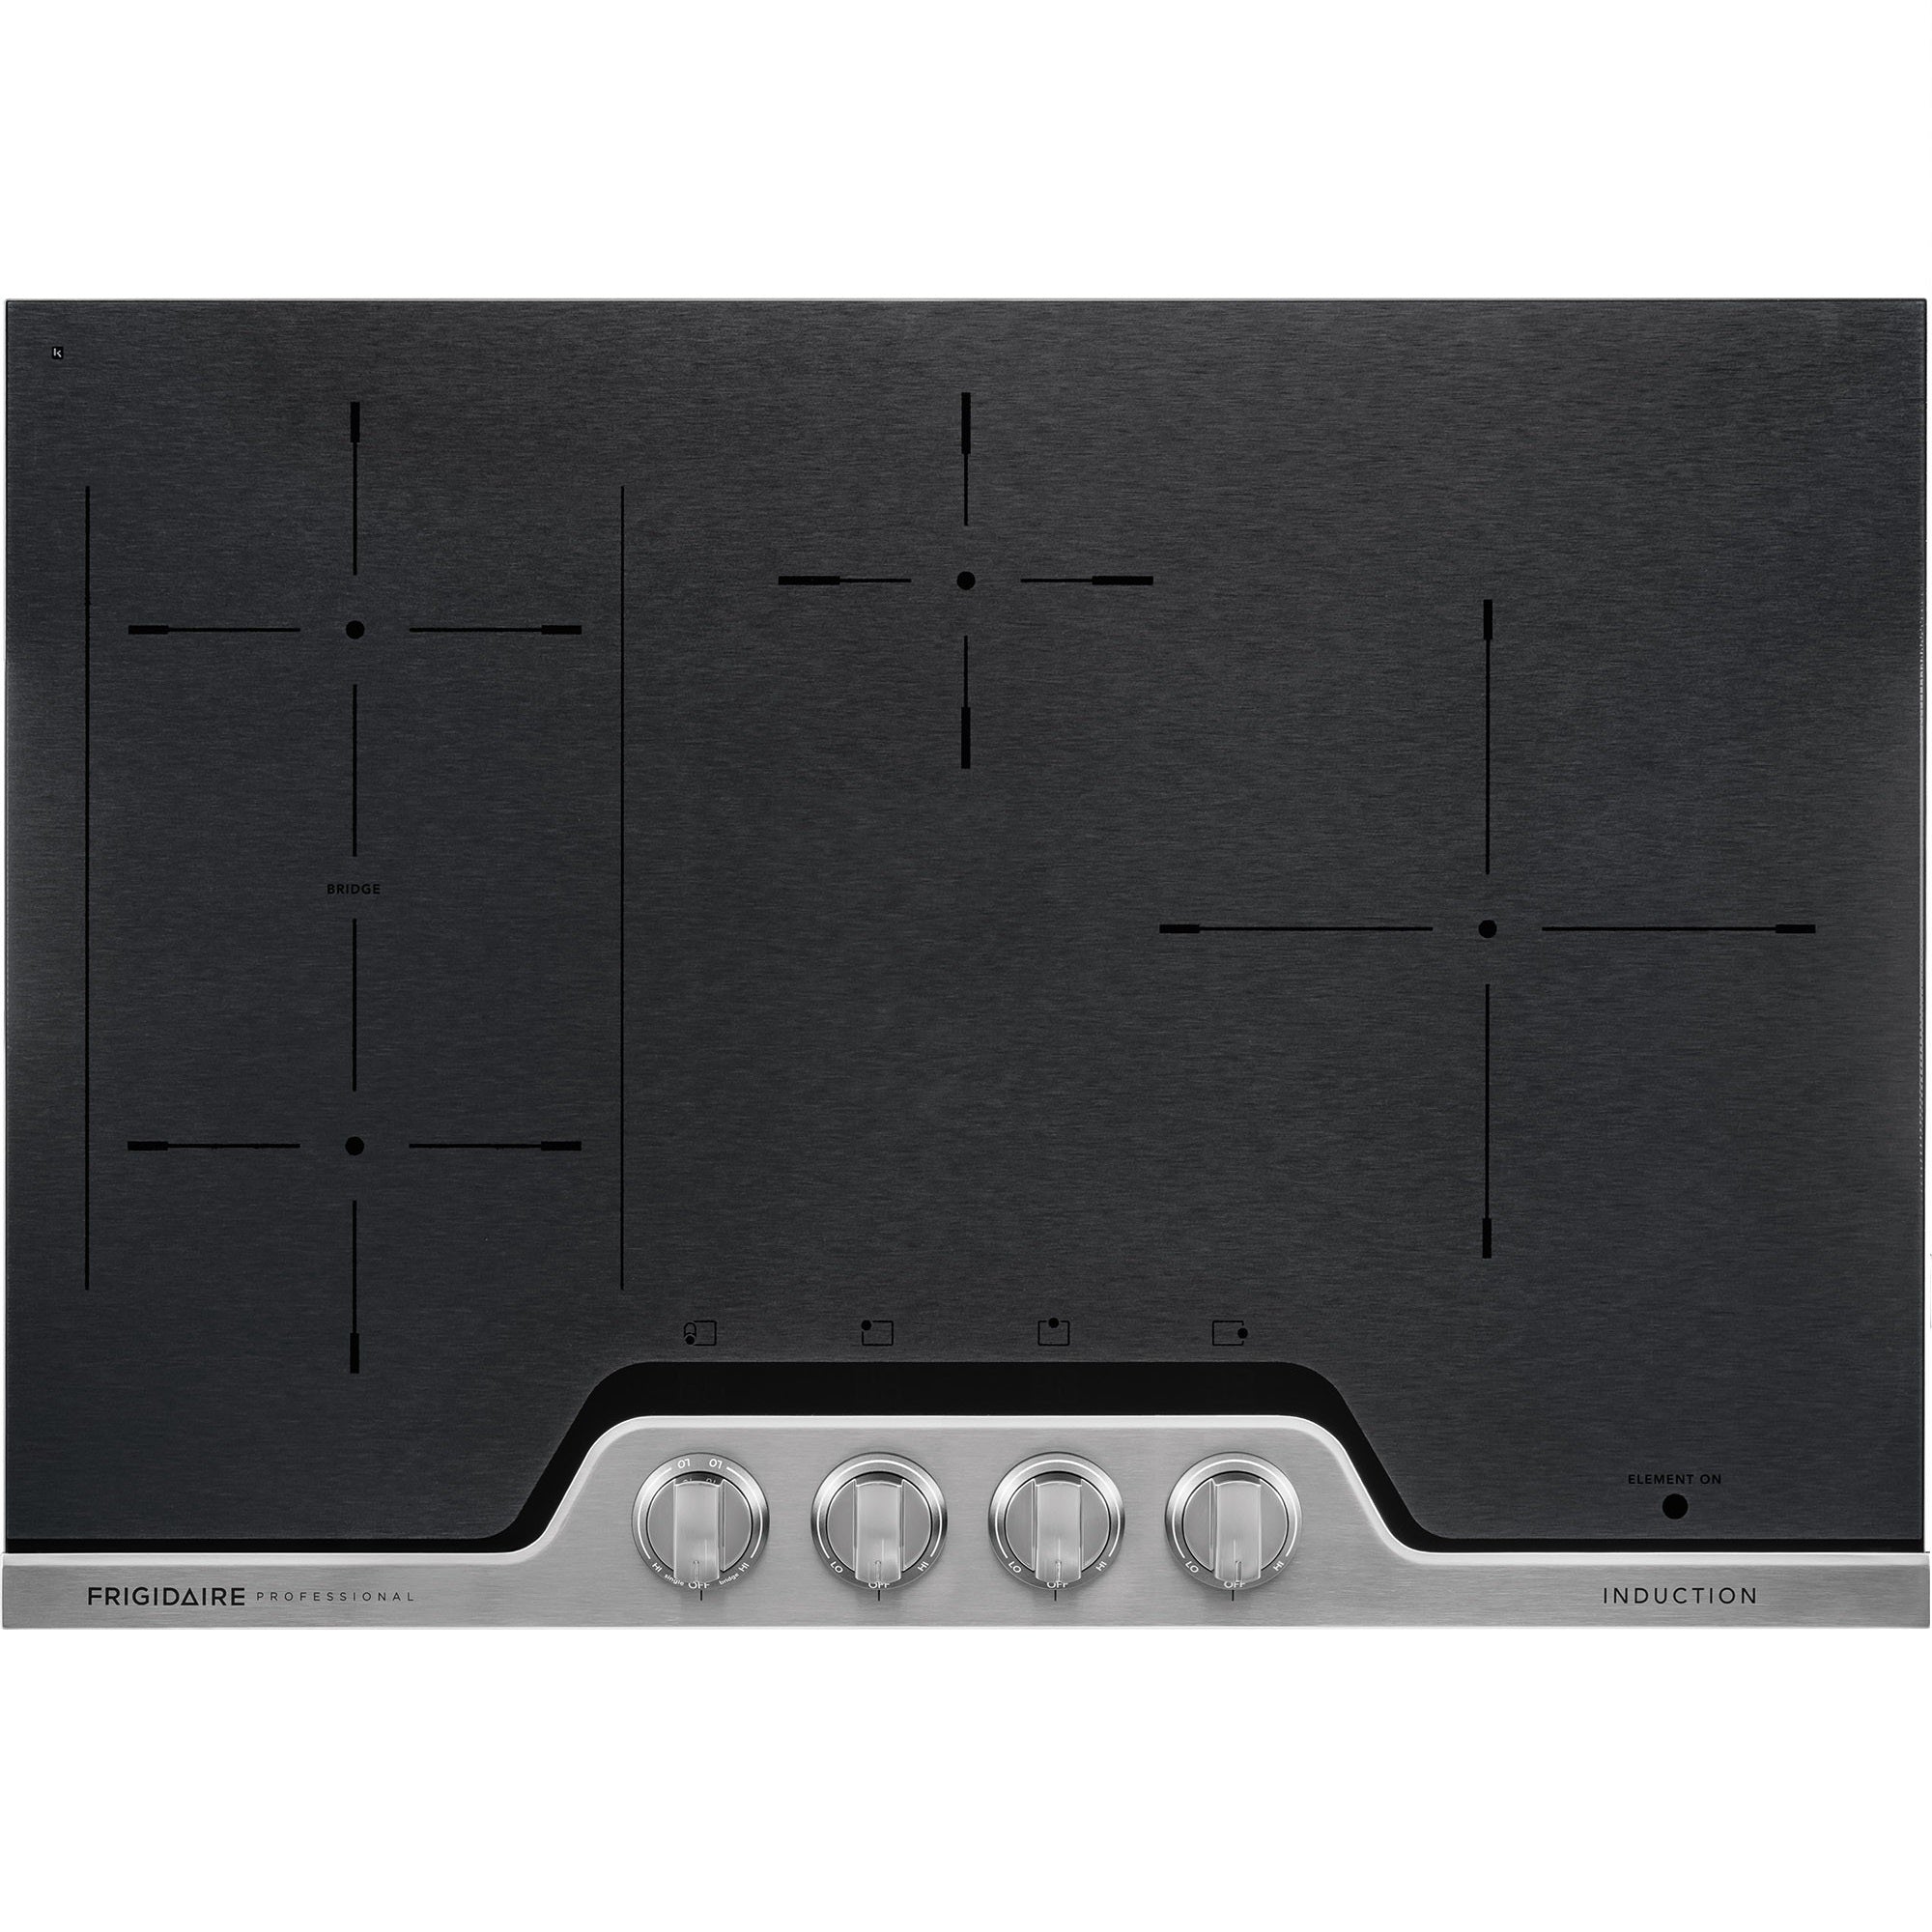 FPIC3077RF - COOKTOPS - Frigidaire Professional - Induction - Stainless Steel - New - COOKTOPS - BonPrix Électroménagers